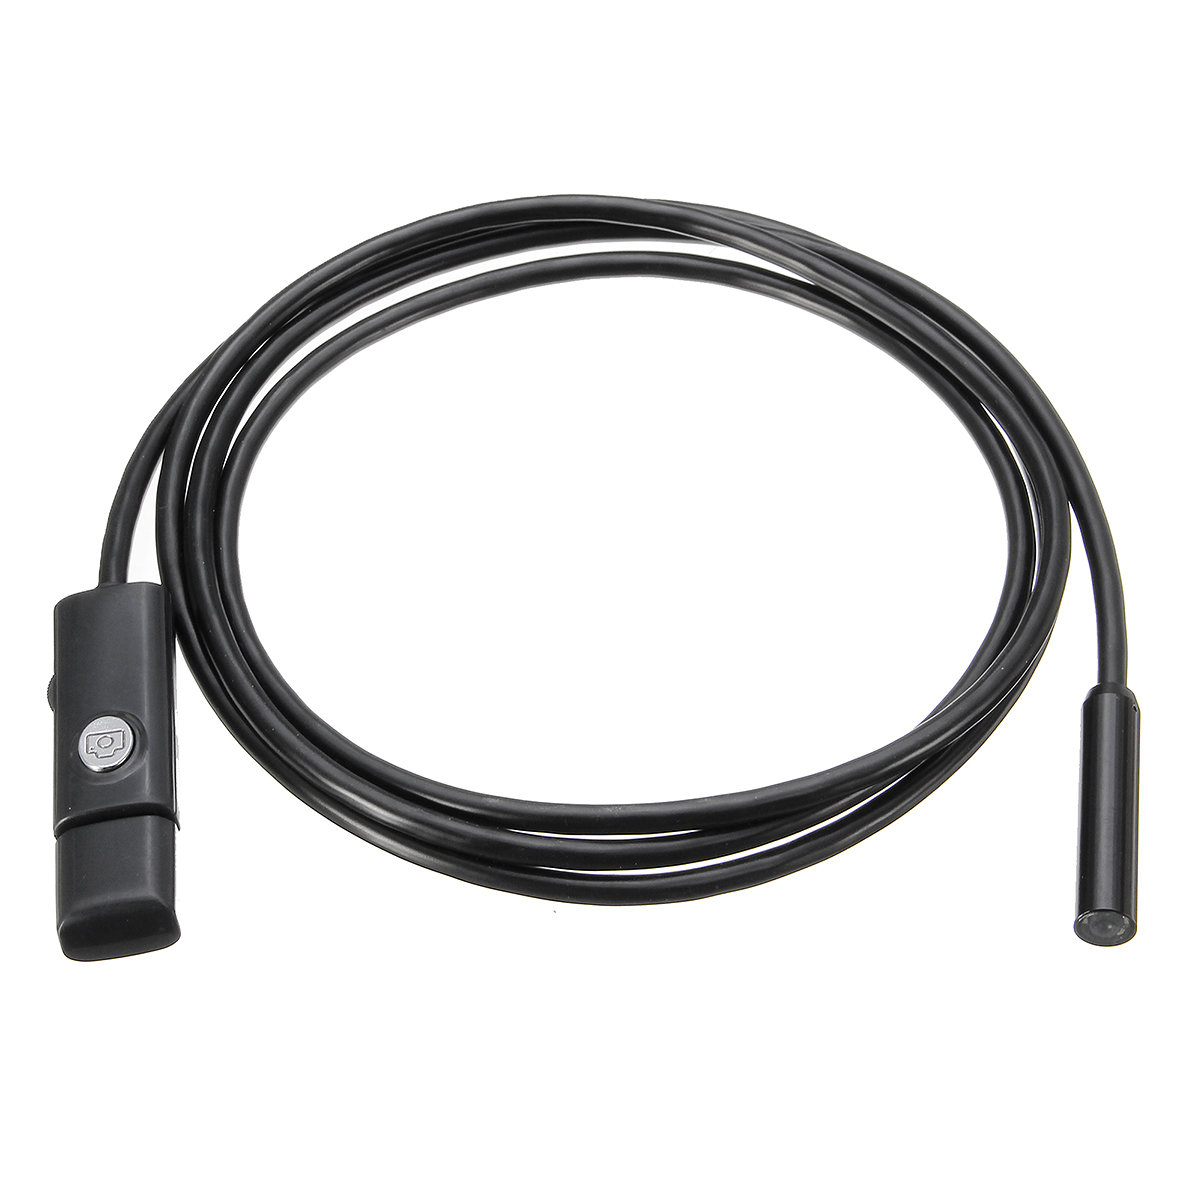 

6 LED 9mm Lens Waterproof IP67 USB Wire Endoscope Camera Inspection Borescope Tube Camera for Android Tablet PC